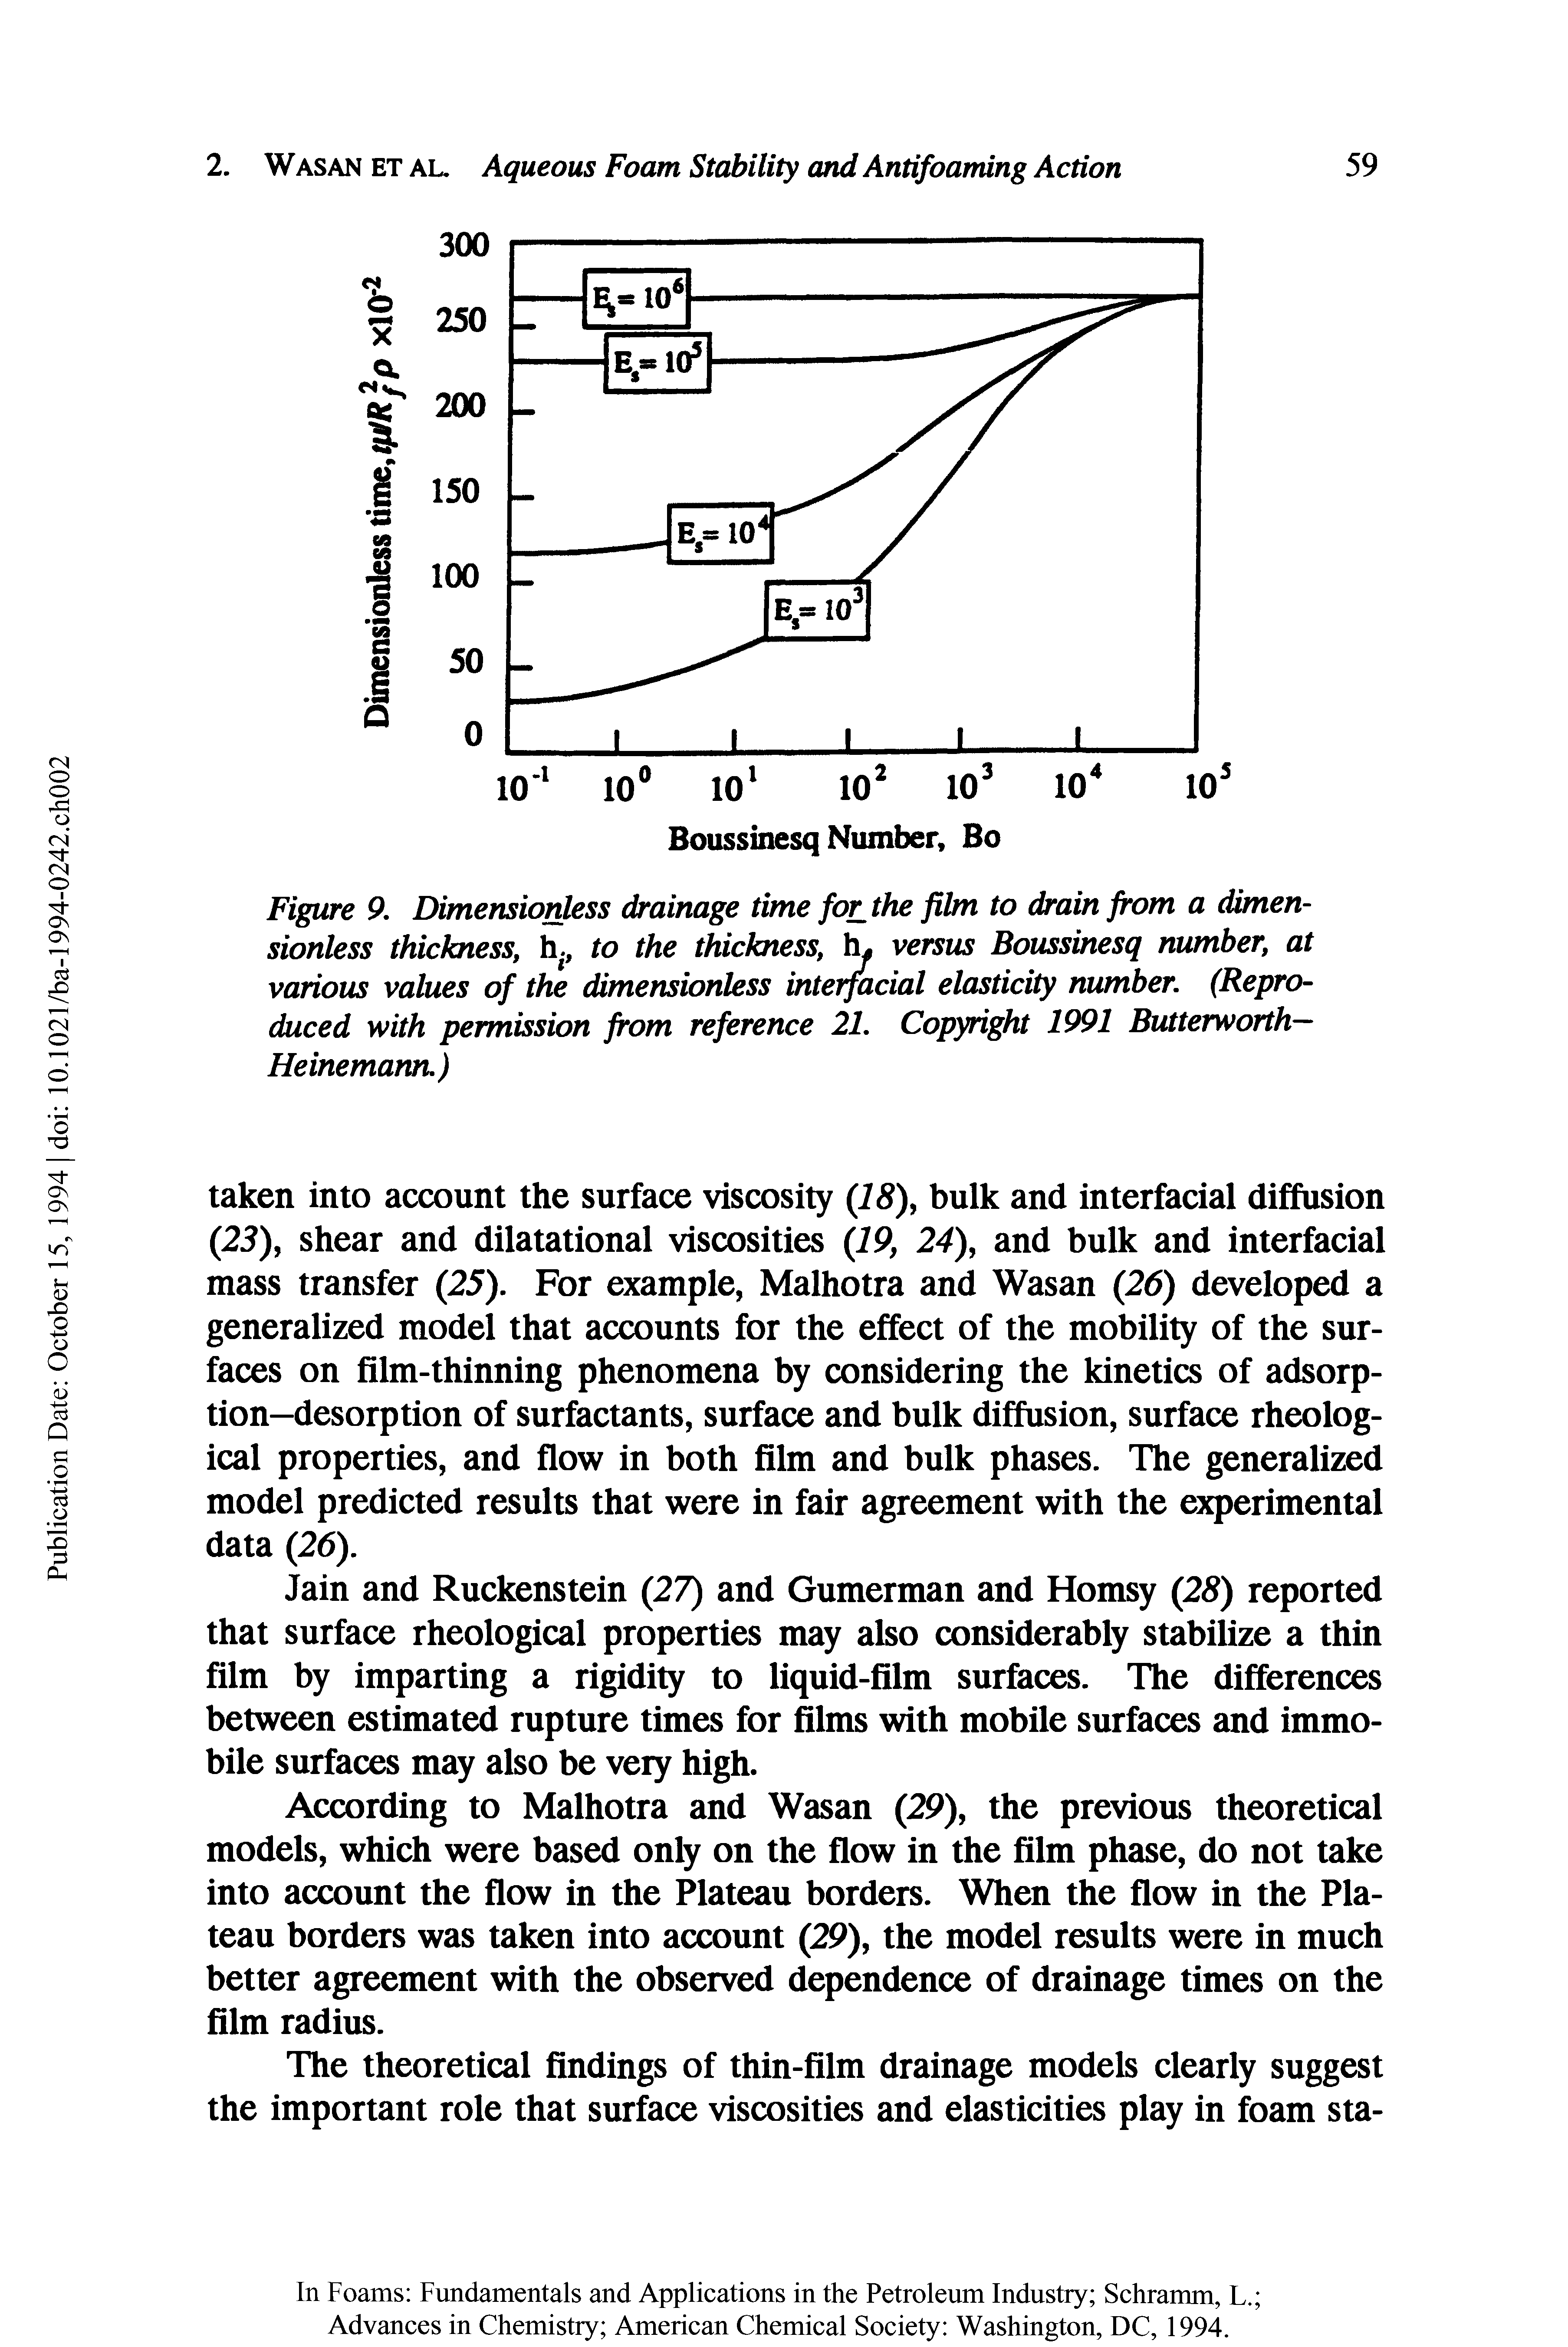 Figure 9. Dimensionless drainage time for the film to drain from a dimensionless thickness, h(, to the thickness, by versus Boussinesq number, at various values of the dimensionless interfacial elasticity number. (Reproduced with permission from reference 21. Copyright 1991 Butterworth— Heinemann.)...